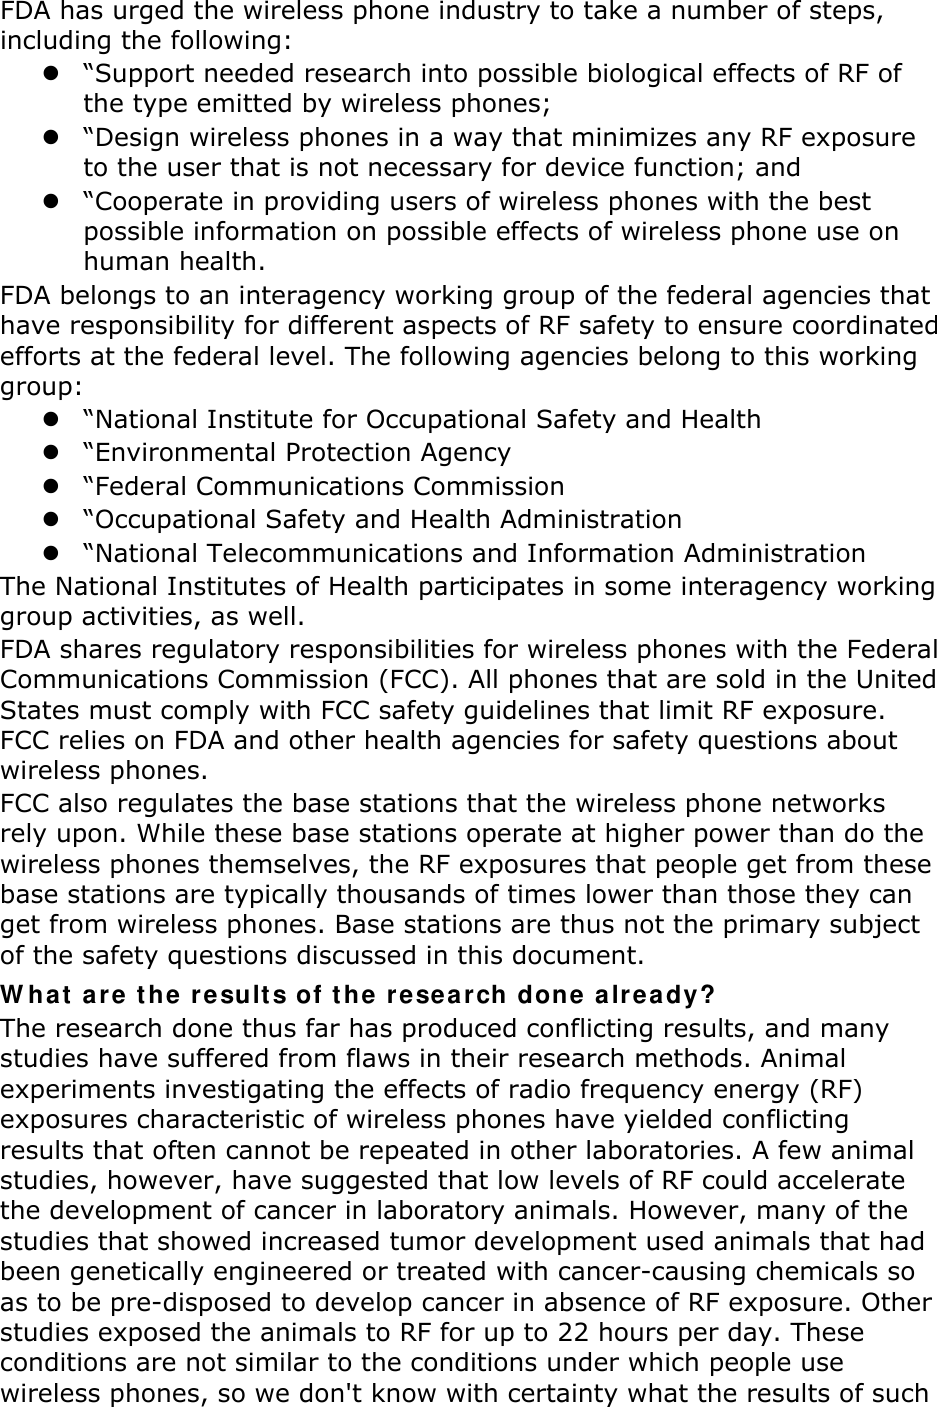 FDA has urged the wireless phone industry to take a number of steps, including the following:  “Support needed research into possible biological effects of RF of the type emitted by wireless phones;  “Design wireless phones in a way that minimizes any RF exposure to the user that is not necessary for device function; and  “Cooperate in providing users of wireless phones with the best possible information on possible effects of wireless phone use on human health. FDA belongs to an interagency working group of the federal agencies that have responsibility for different aspects of RF safety to ensure coordinated efforts at the federal level. The following agencies belong to this working group:  “National Institute for Occupational Safety and Health  “Environmental Protection Agency  “Federal Communications Commission  “Occupational Safety and Health Administration  “National Telecommunications and Information Administration The National Institutes of Health participates in some interagency working group activities, as well. FDA shares regulatory responsibilities for wireless phones with the Federal Communications Commission (FCC). All phones that are sold in the United States must comply with FCC safety guidelines that limit RF exposure. FCC relies on FDA and other health agencies for safety questions about wireless phones. FCC also regulates the base stations that the wireless phone networks rely upon. While these base stations operate at higher power than do the wireless phones themselves, the RF exposures that people get from these base stations are typically thousands of times lower than those they can get from wireless phones. Base stations are thus not the primary subject of the safety questions discussed in this document. What are the results of the research done already? The research done thus far has produced conflicting results, and many studies have suffered from flaws in their research methods. Animal experiments investigating the effects of radio frequency energy (RF) exposures characteristic of wireless phones have yielded conflicting results that often cannot be repeated in other laboratories. A few animal studies, however, have suggested that low levels of RF could accelerate the development of cancer in laboratory animals. However, many of the studies that showed increased tumor development used animals that had been genetically engineered or treated with cancer-causing chemicals so as to be pre-disposed to develop cancer in absence of RF exposure. Other studies exposed the animals to RF for up to 22 hours per day. These conditions are not similar to the conditions under which people use wireless phones, so we don&apos;t know with certainty what the results of such 